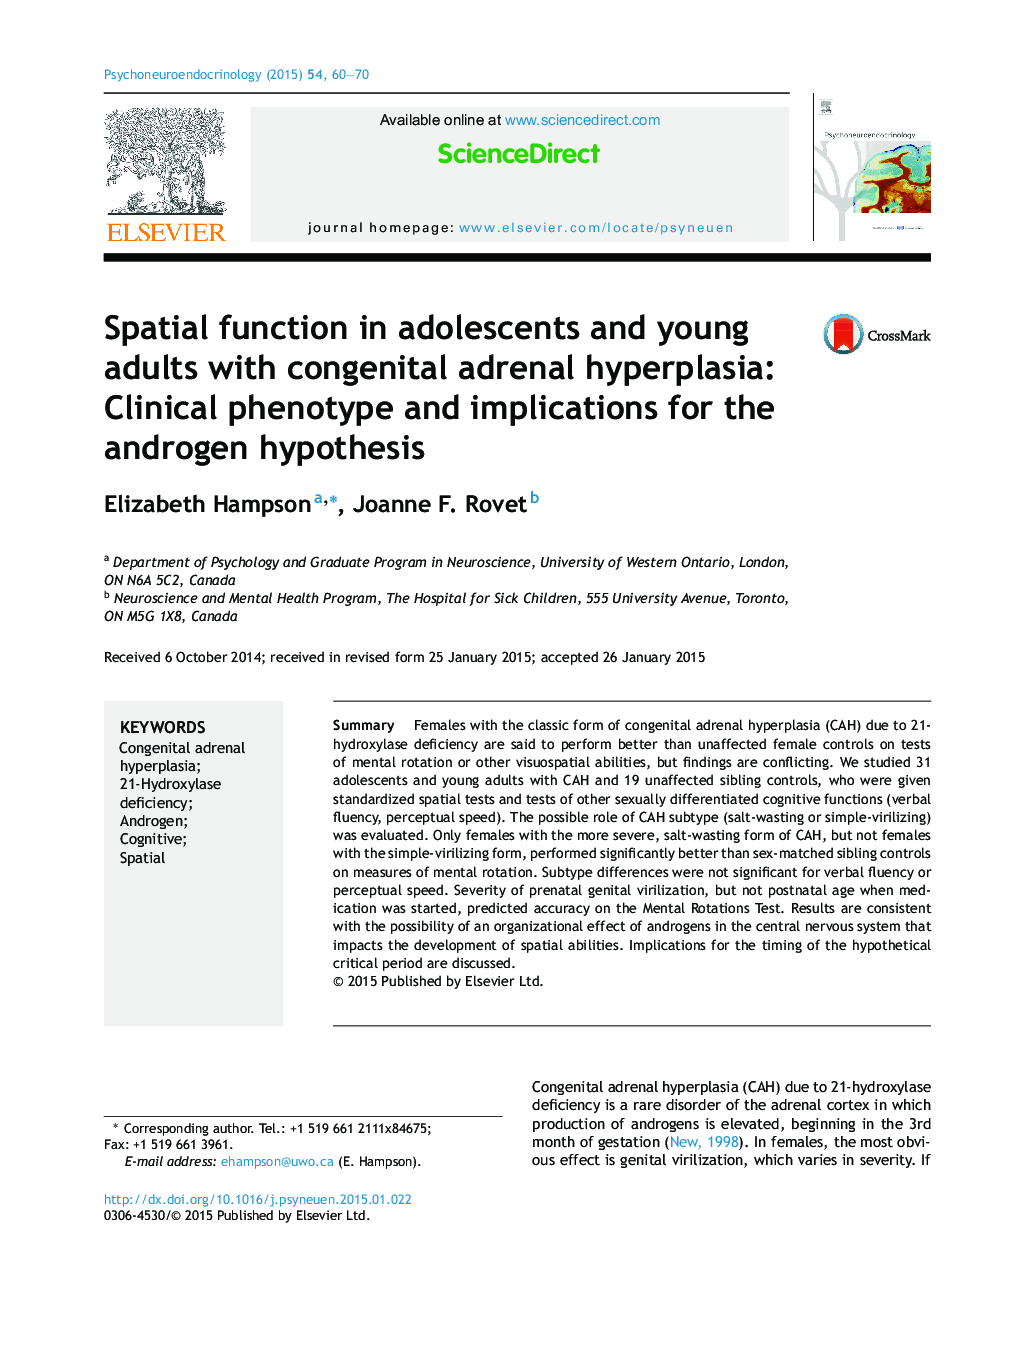 Spatial function in adolescents and young adults with congenital adrenal hyperplasia: Clinical phenotype and implications for the androgen hypothesis